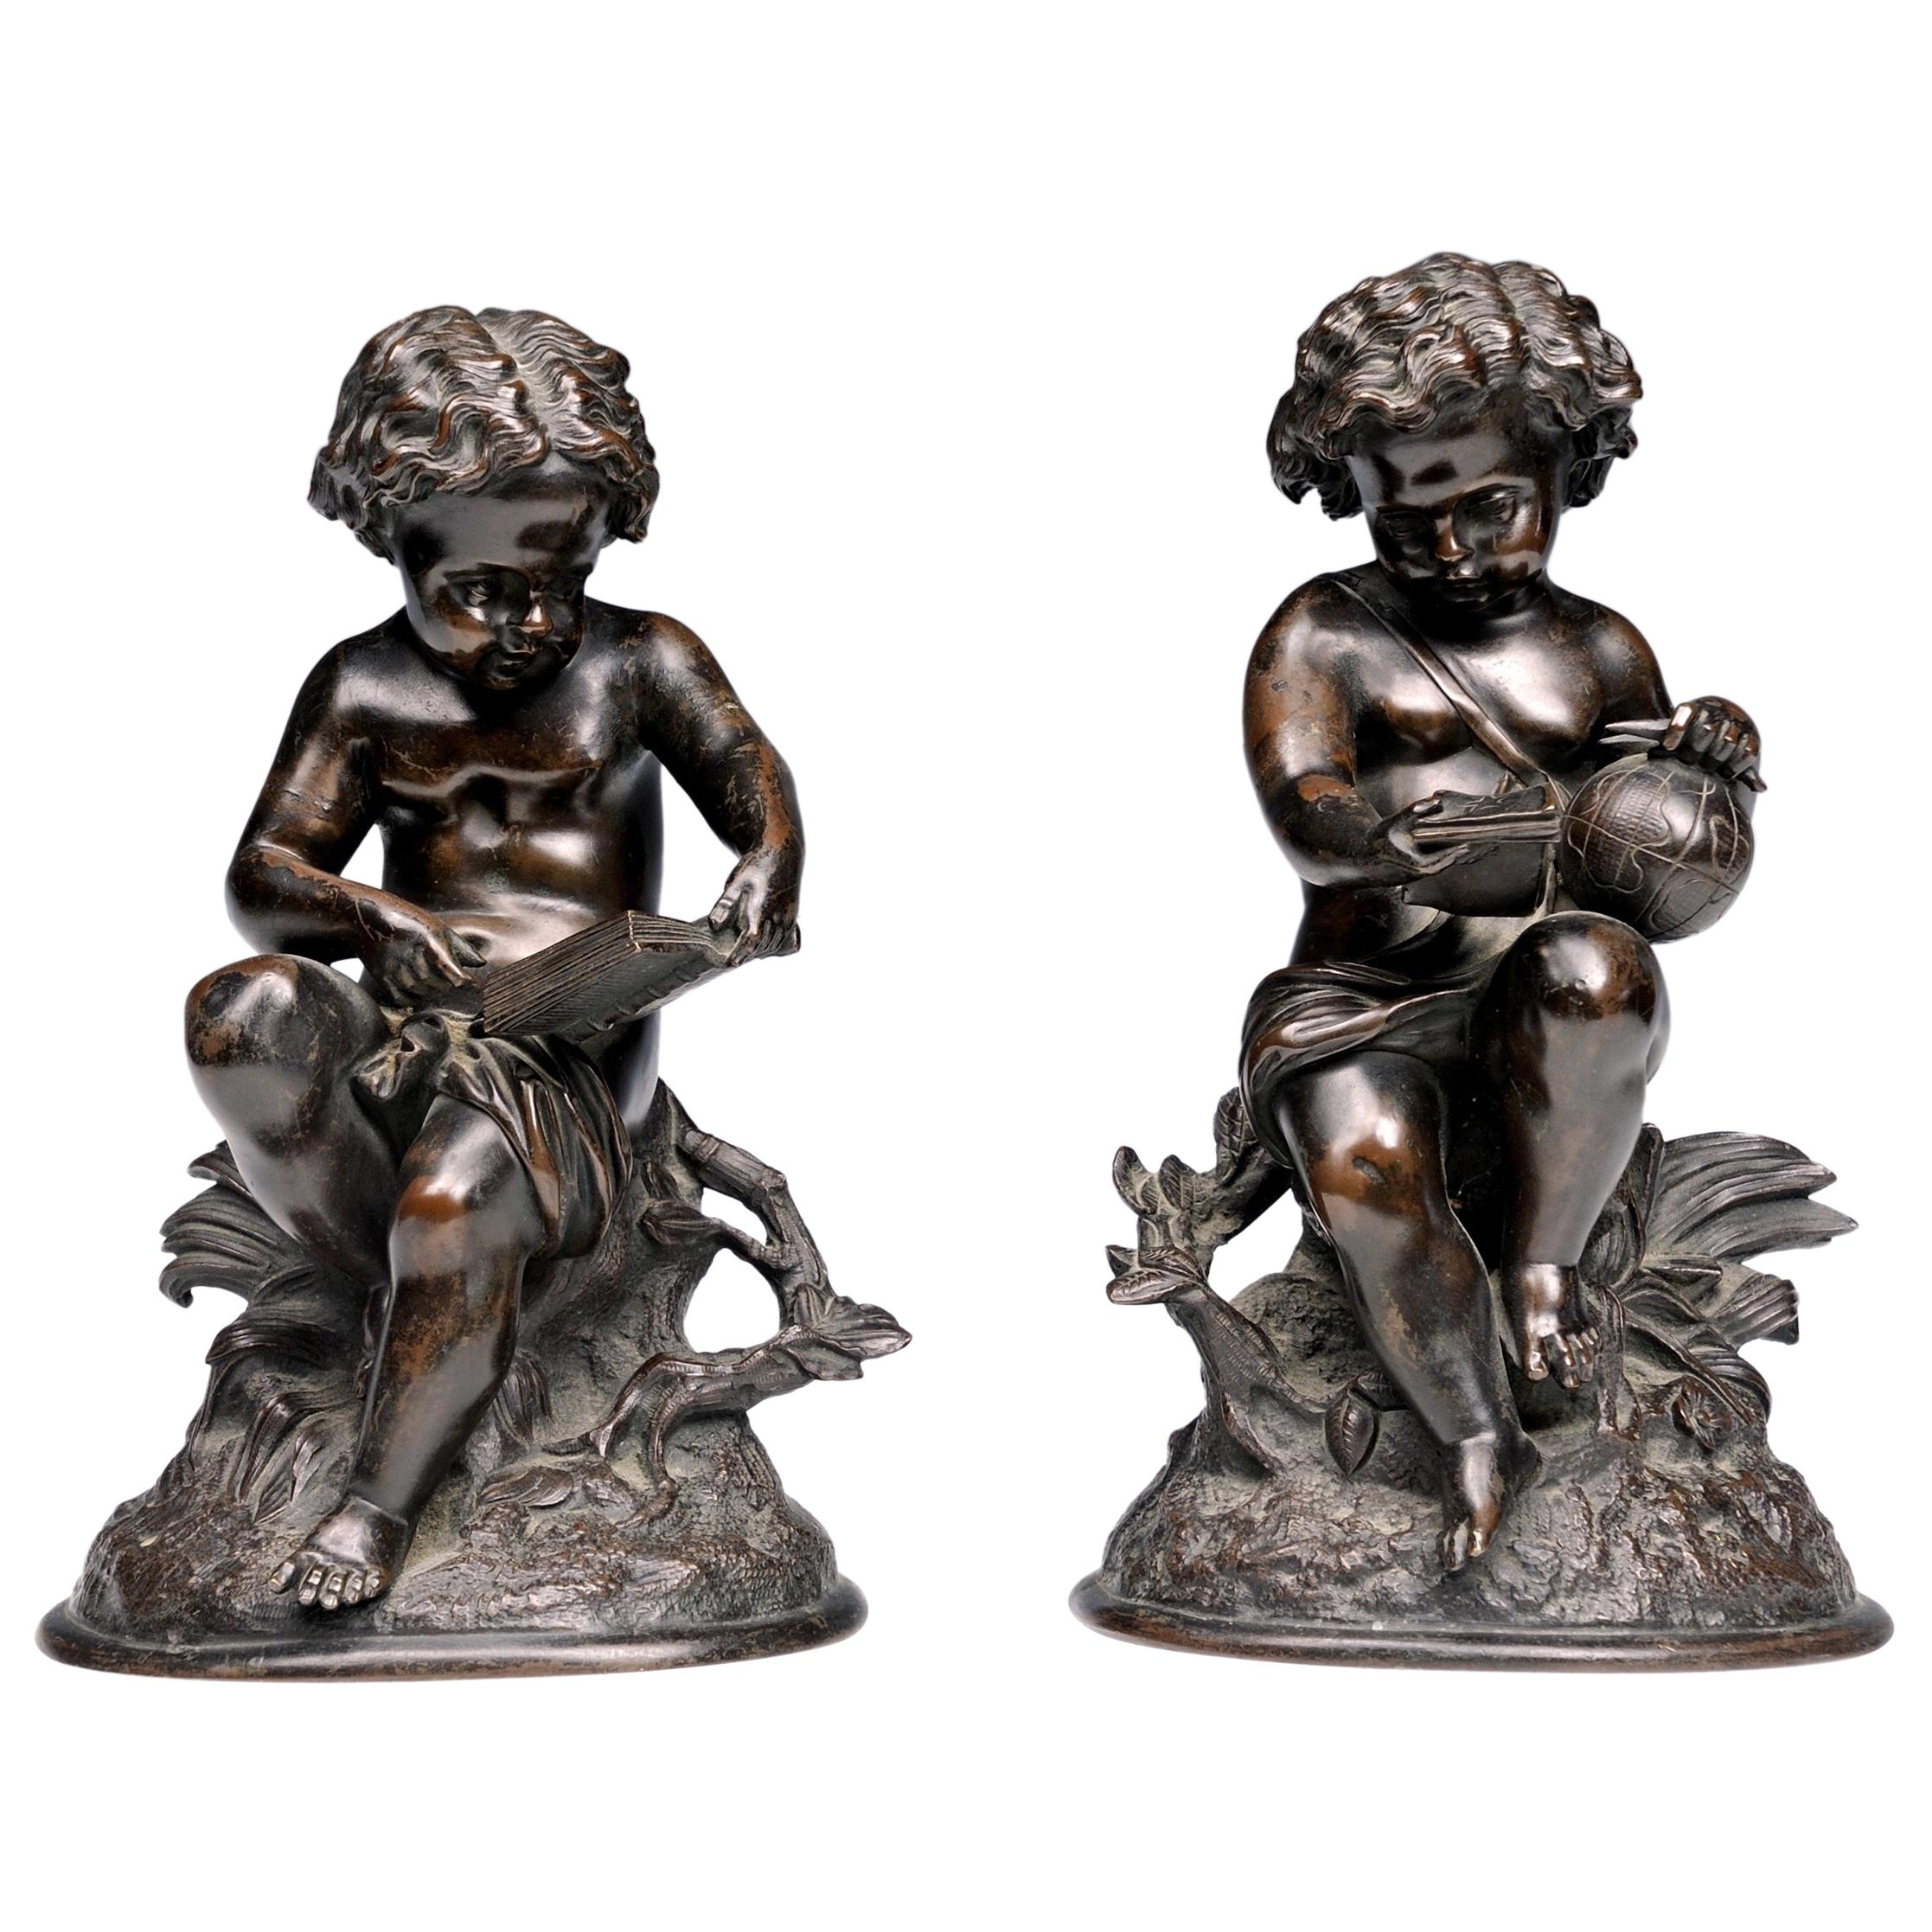 18th-19th Century Pair of French Figural Sculptures Featuring Two Boys